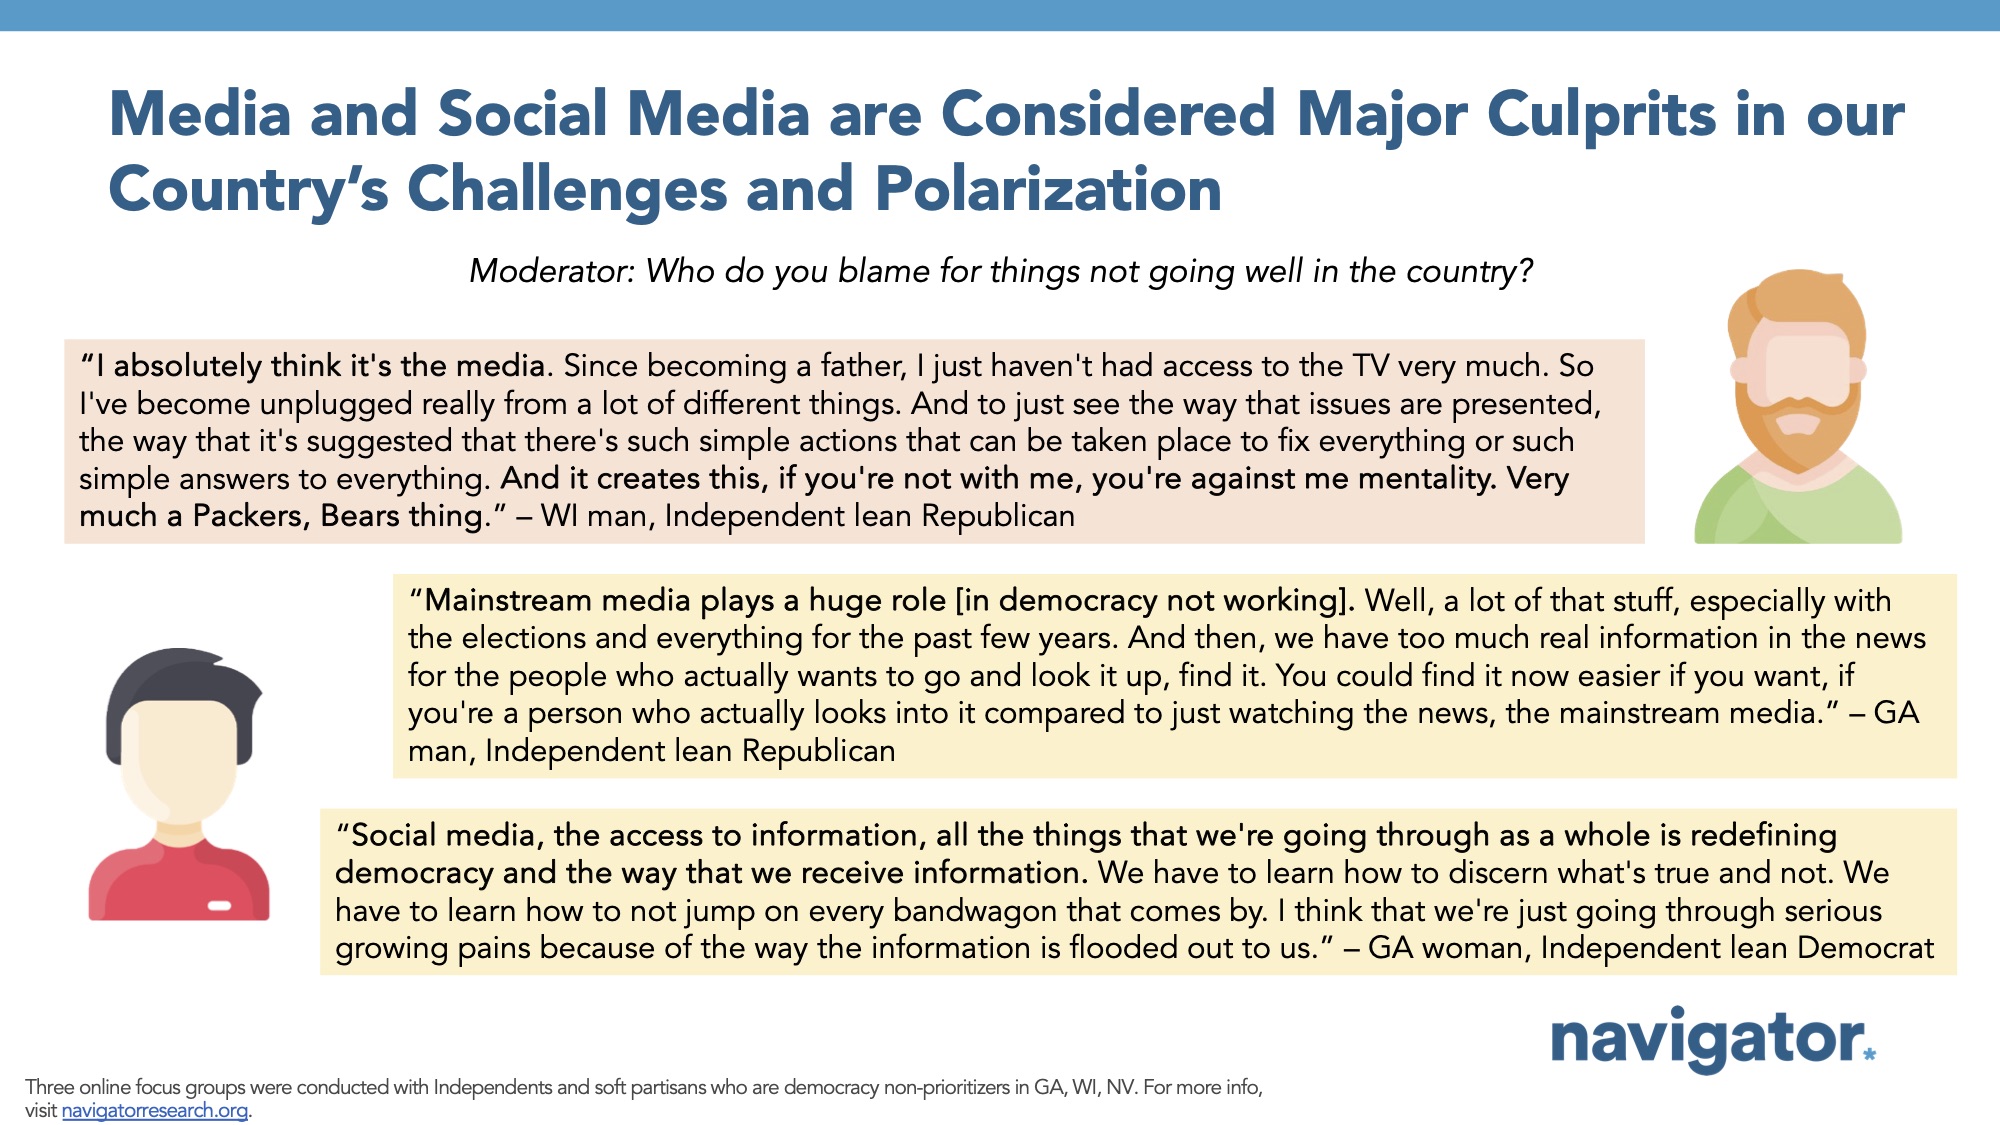 Focus group report slide titled: Media and Social Media are Considered Major Culprits in our Country’s Challenges and Polarization